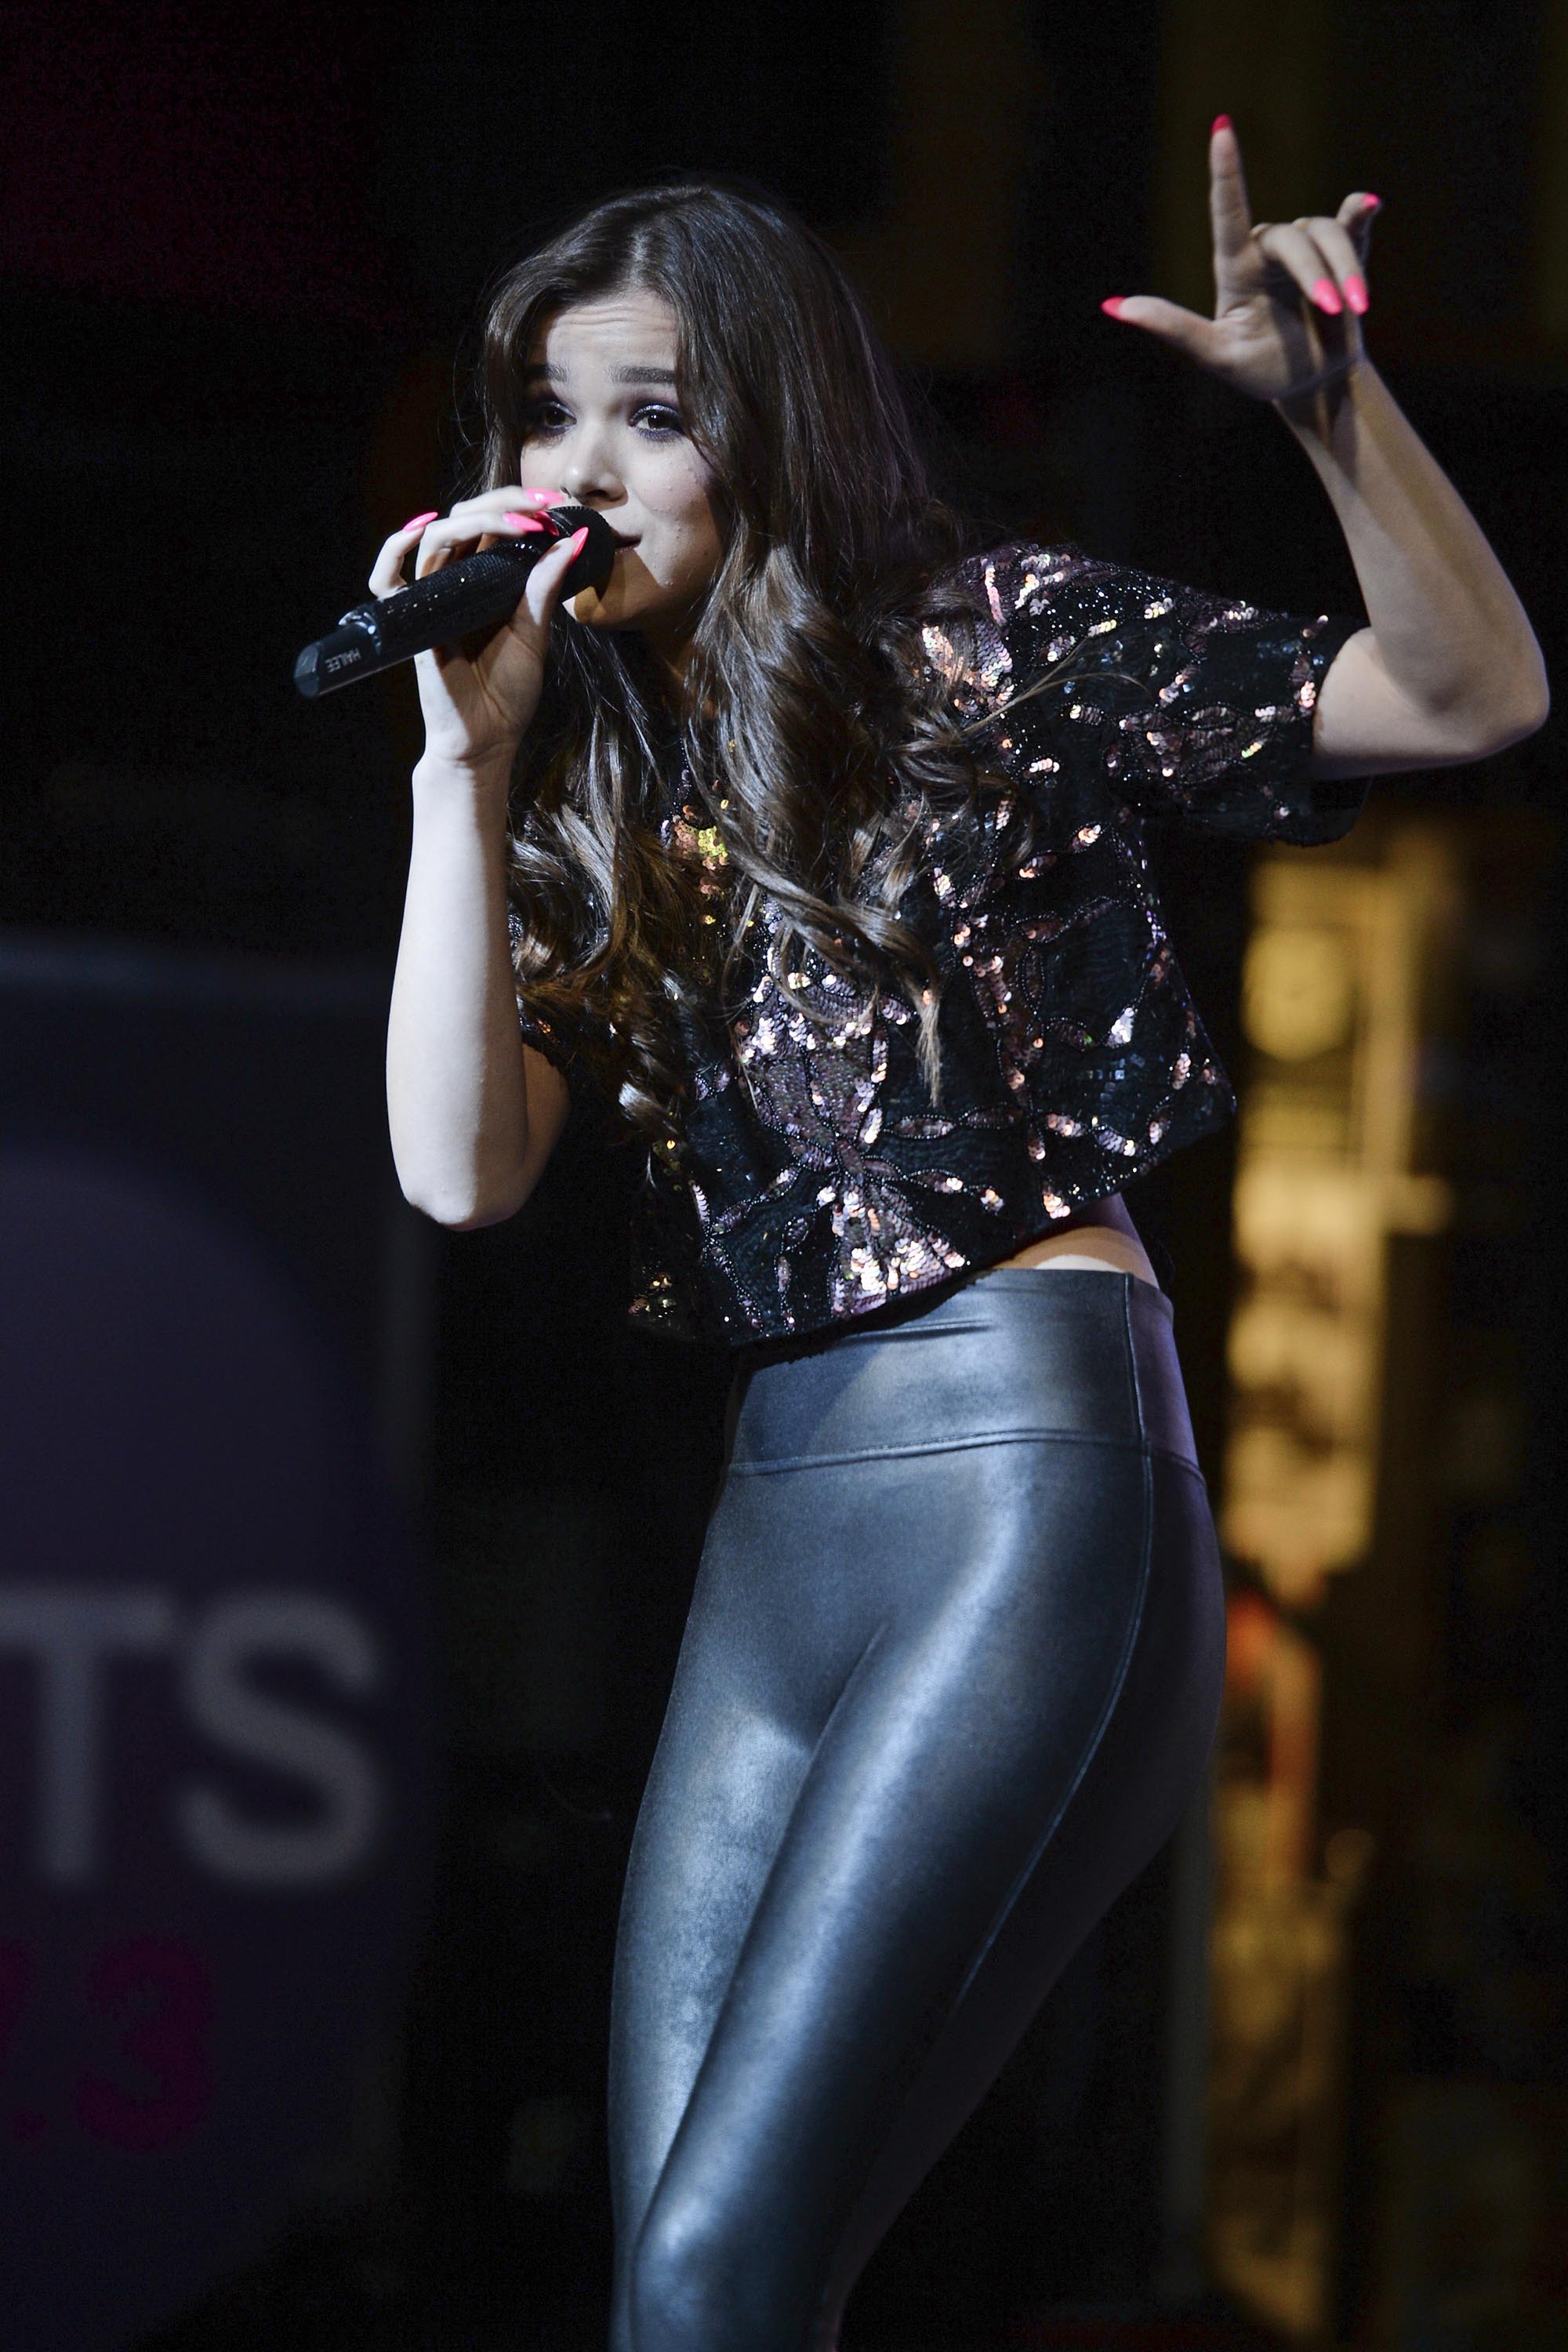 Hailee Steinfeld attends Hits 97.3 Sessions